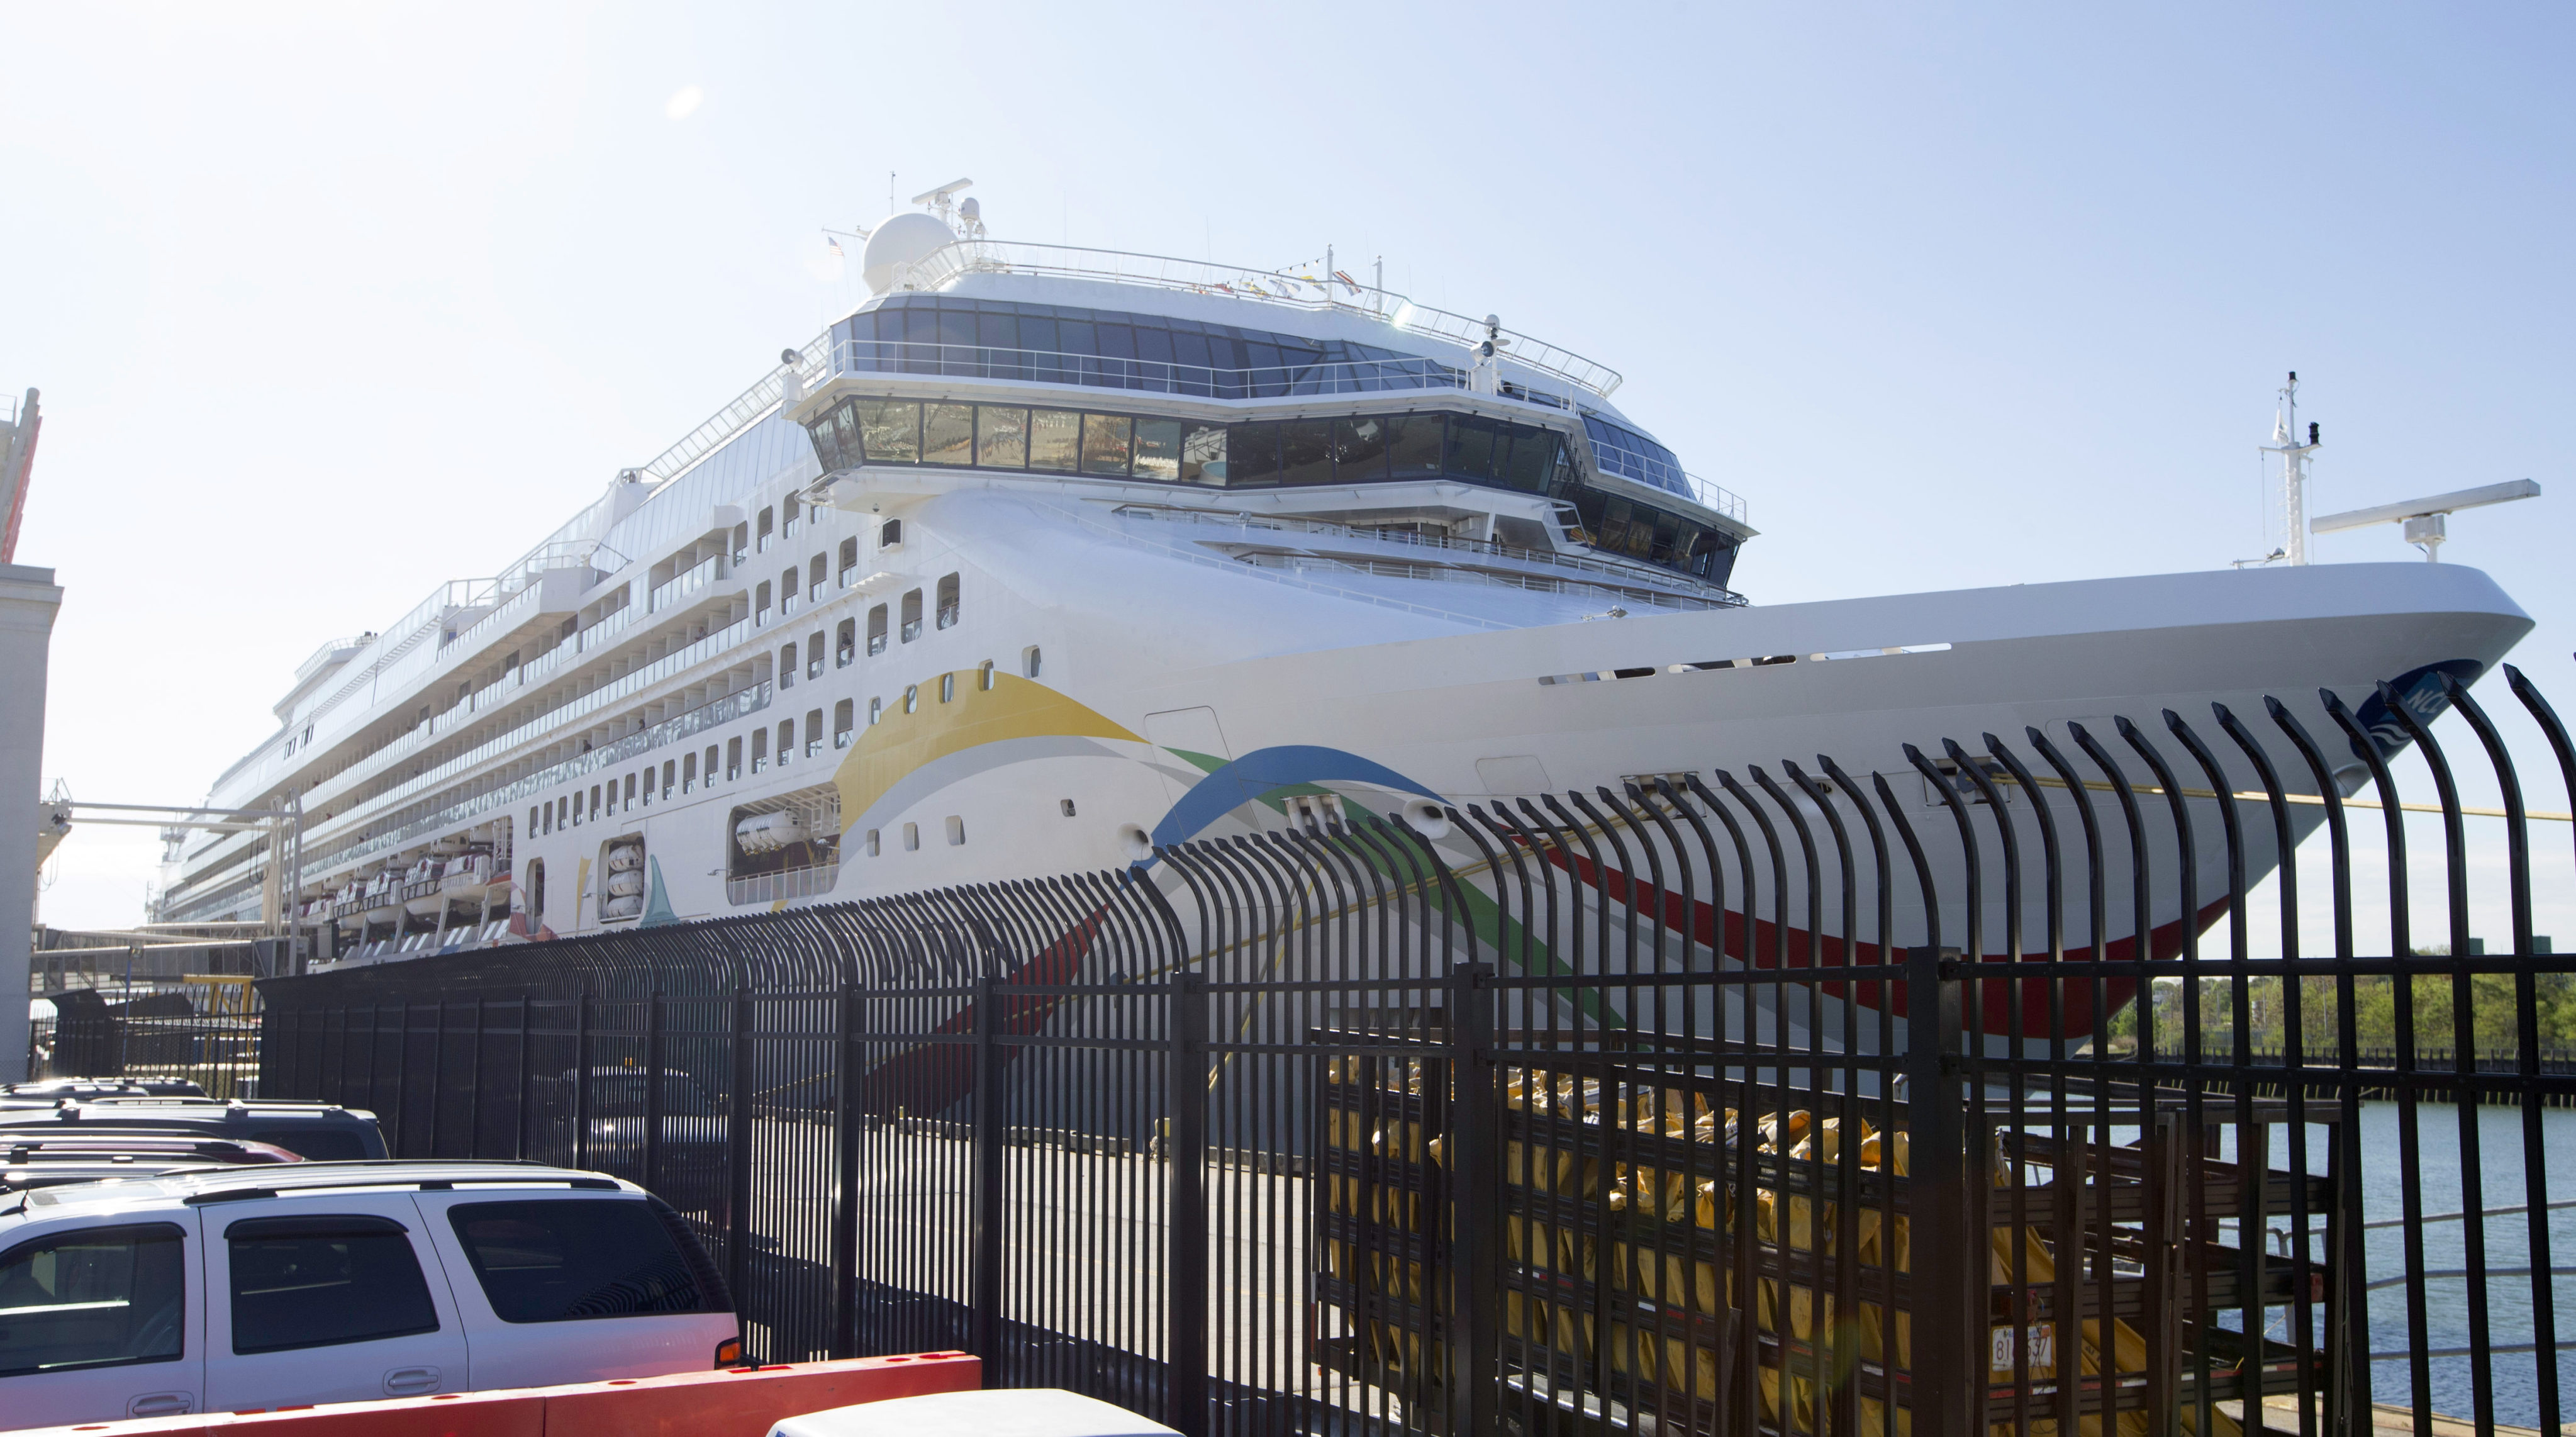 The cruise ship Norwegian Dawn with more than 3,000 passengers and crew onboard was finally allowed to dock in the Indian Ocean island of Mauritius on Monday. Photo: AP